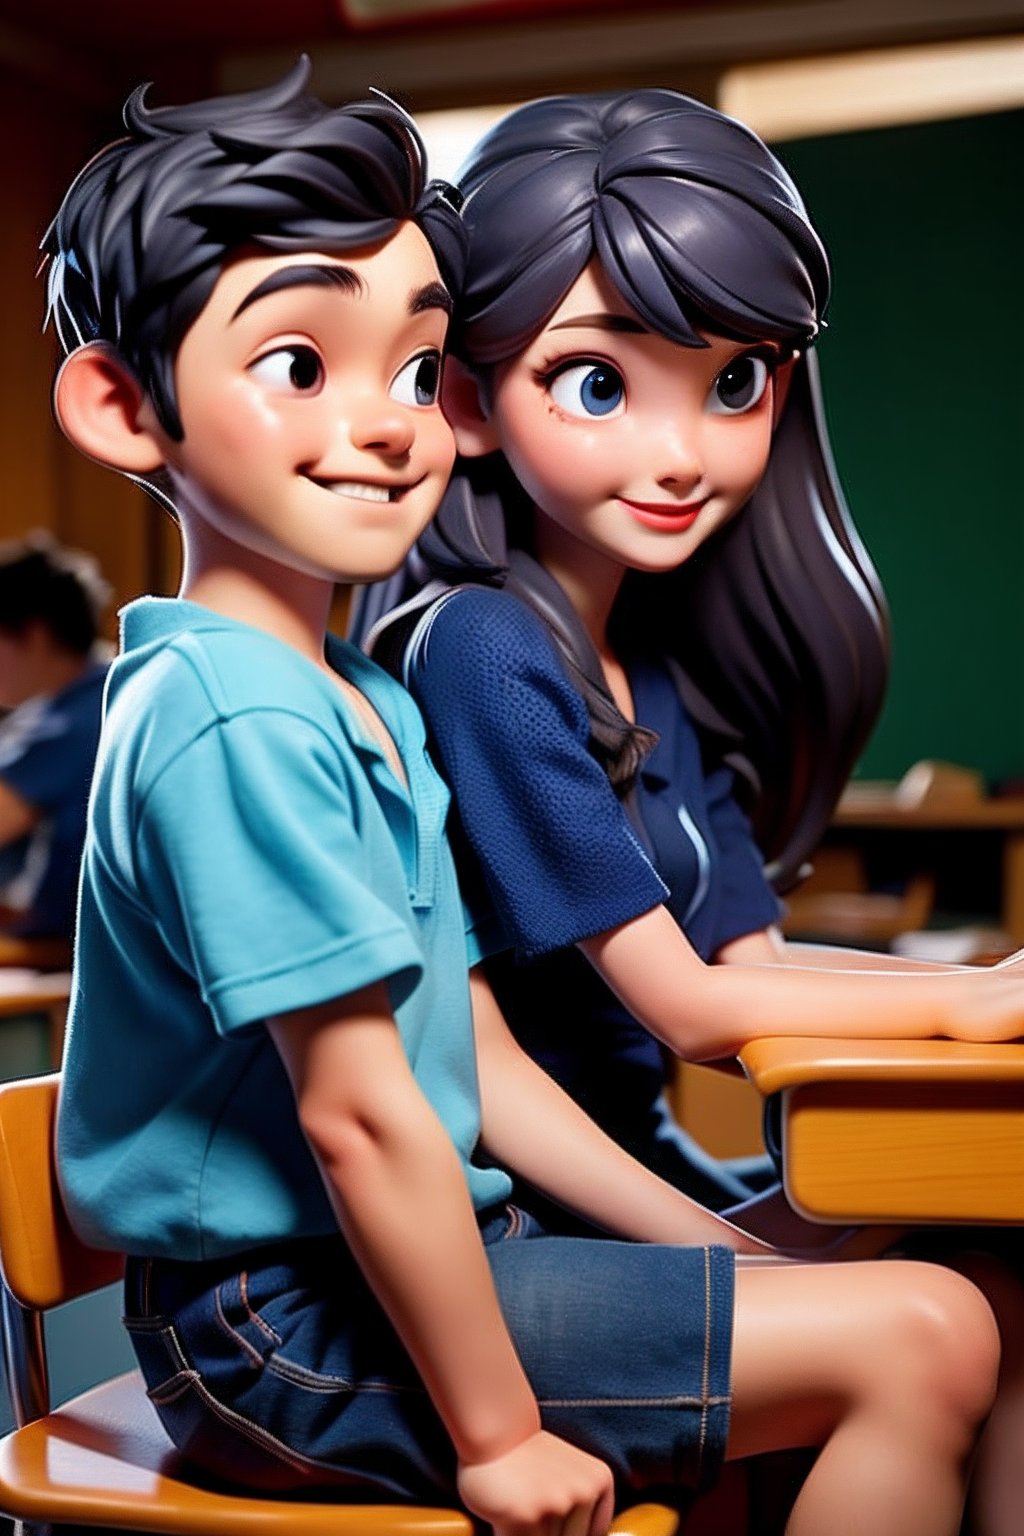 A boy is sitting together with a girl in a classroom, night light, sweet couple.